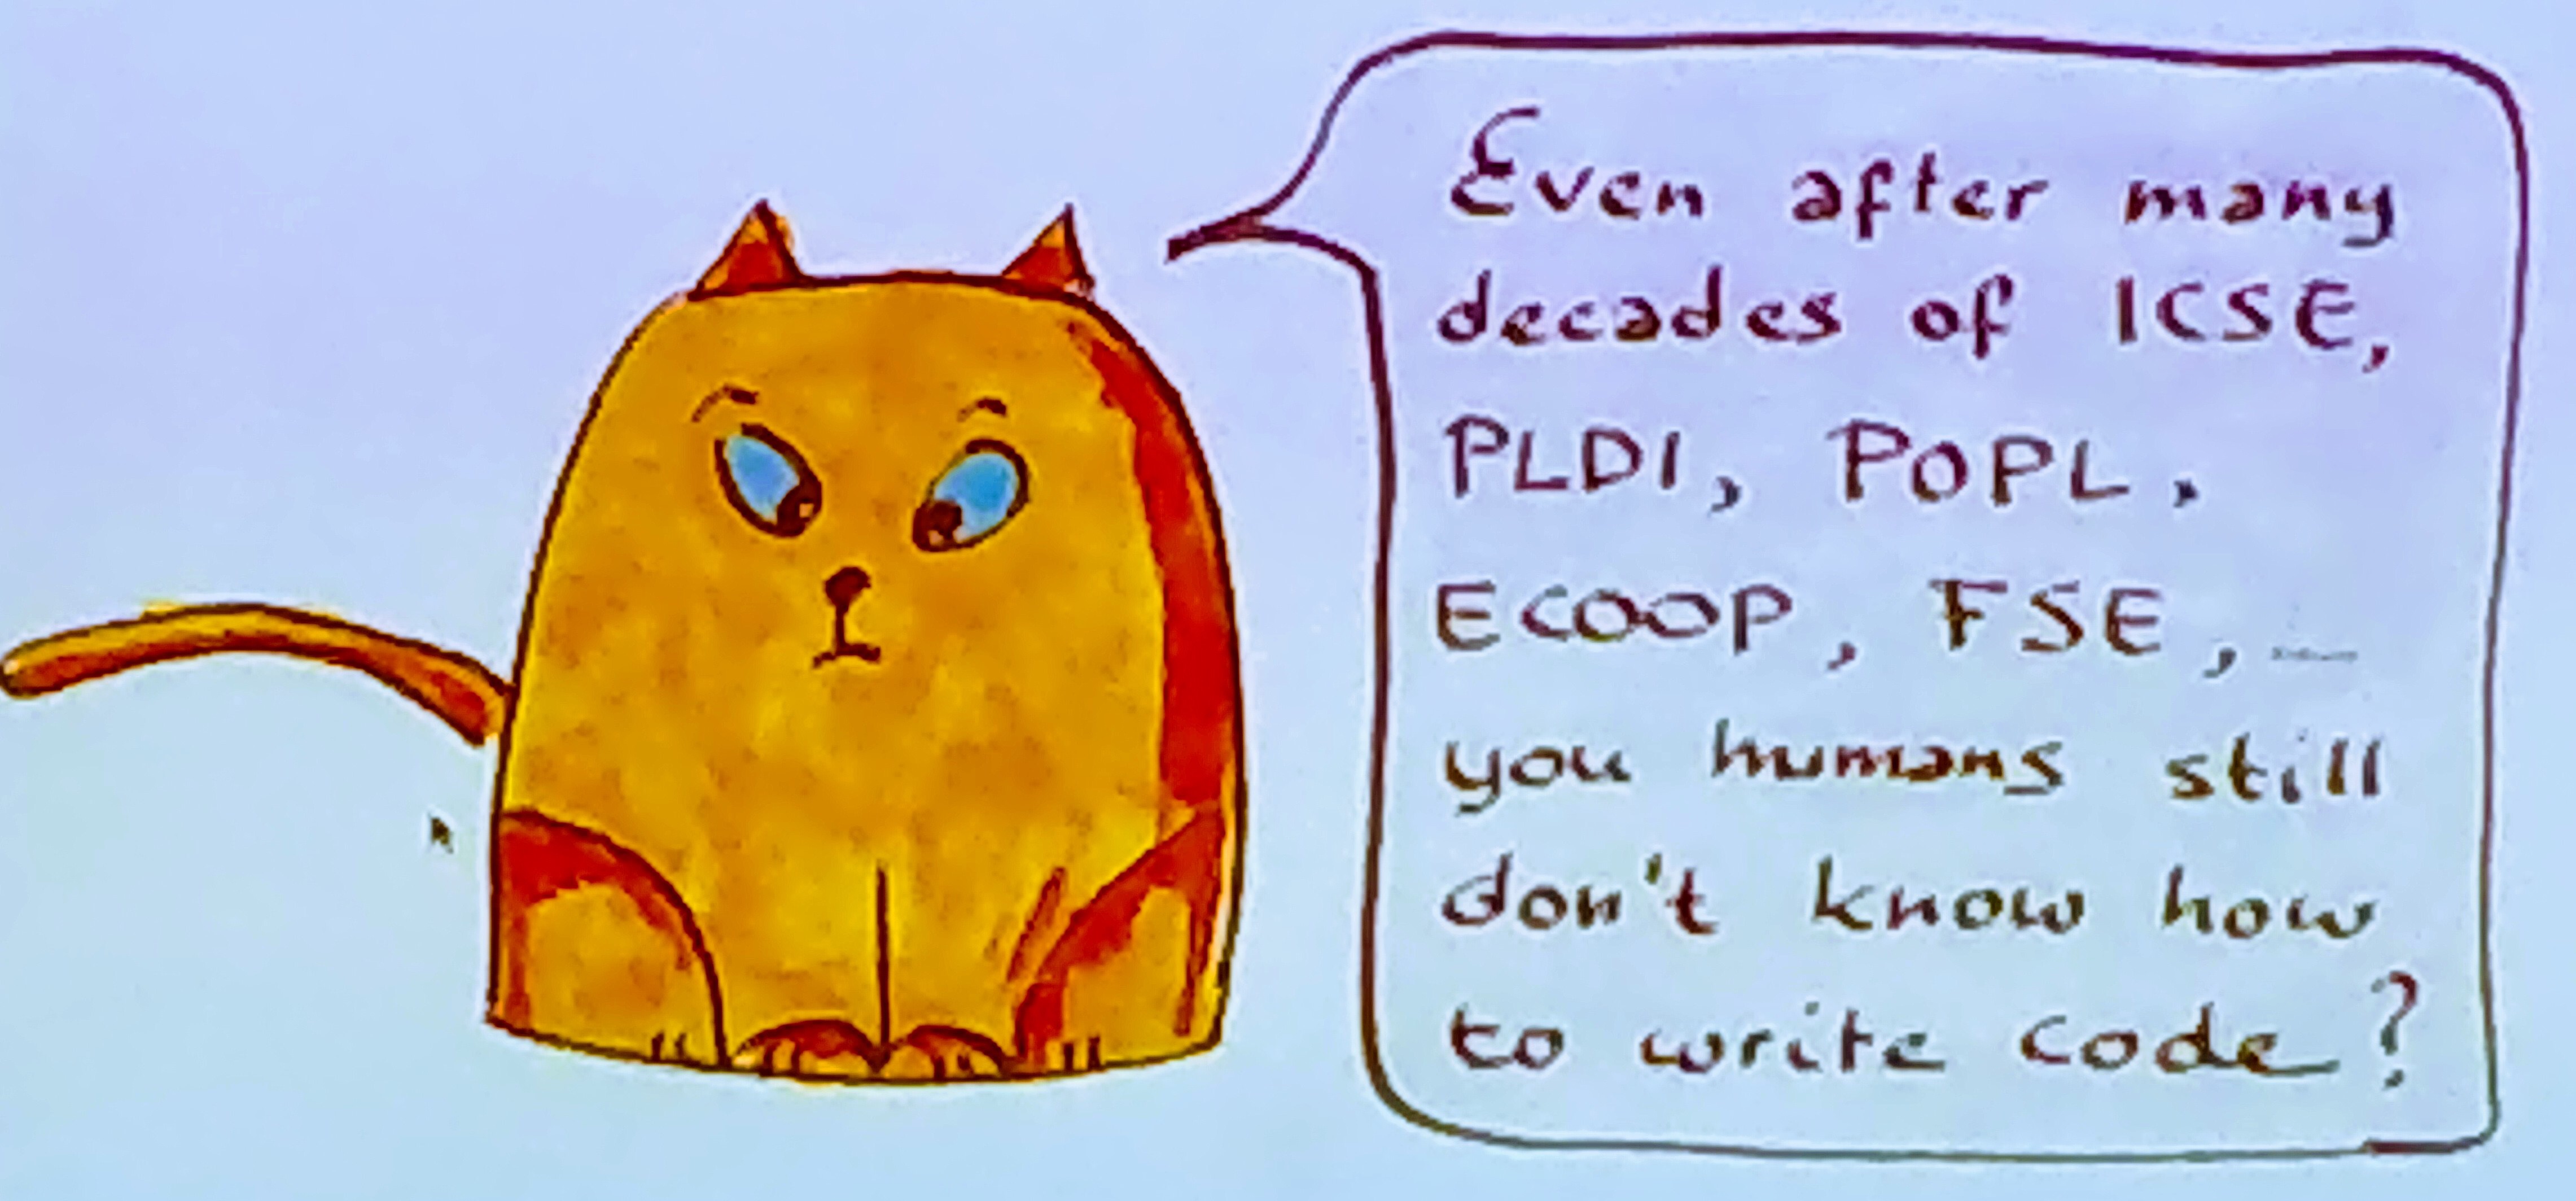 An impertinent cat from the keynote presentation by Erik Meijer.